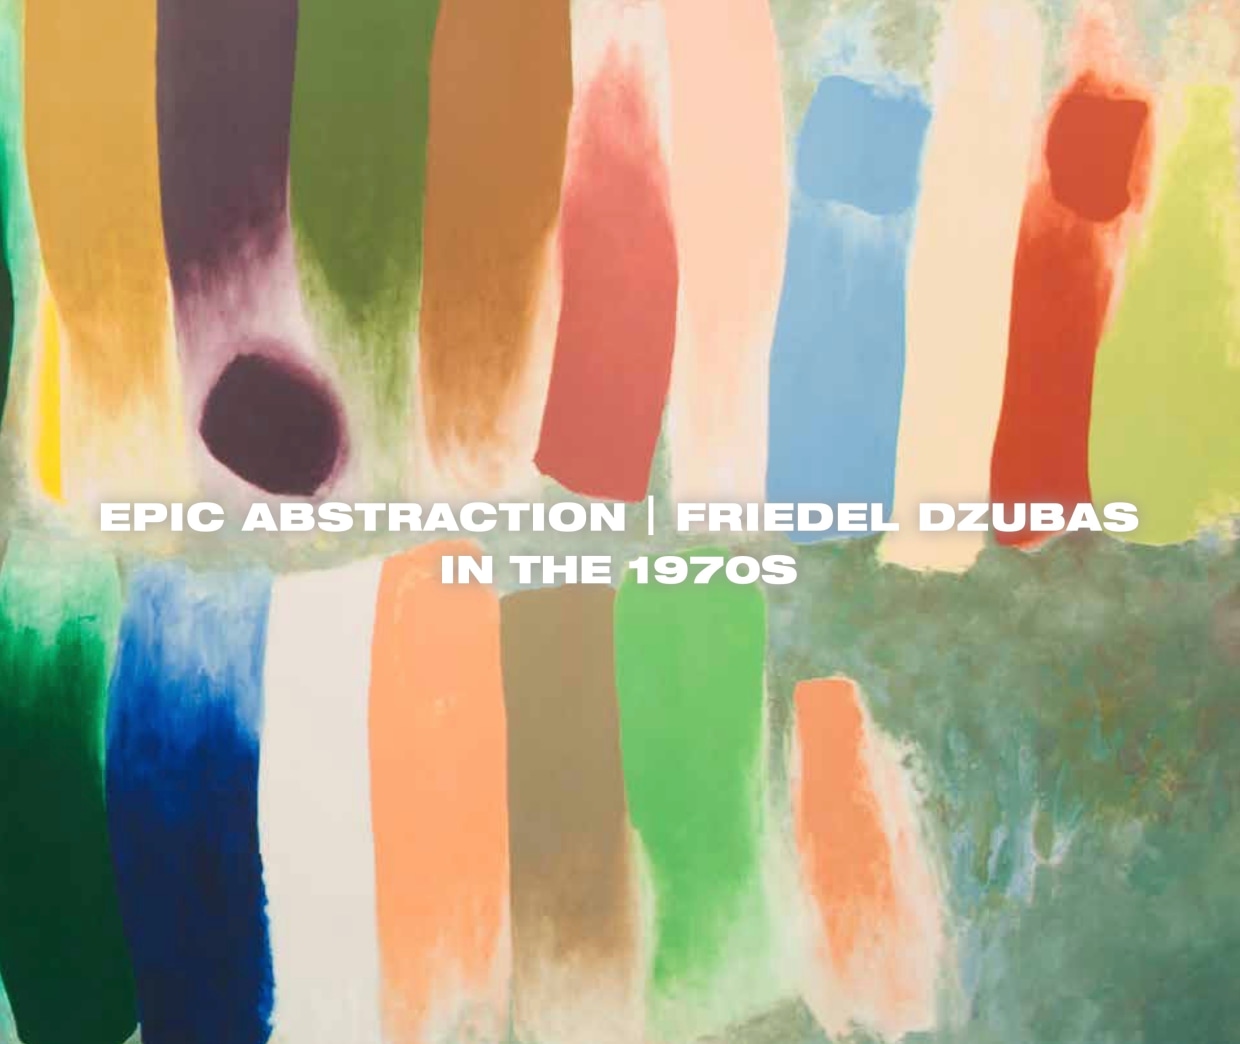 Epic Abstraction | Friedel Dzubas in the 1970s